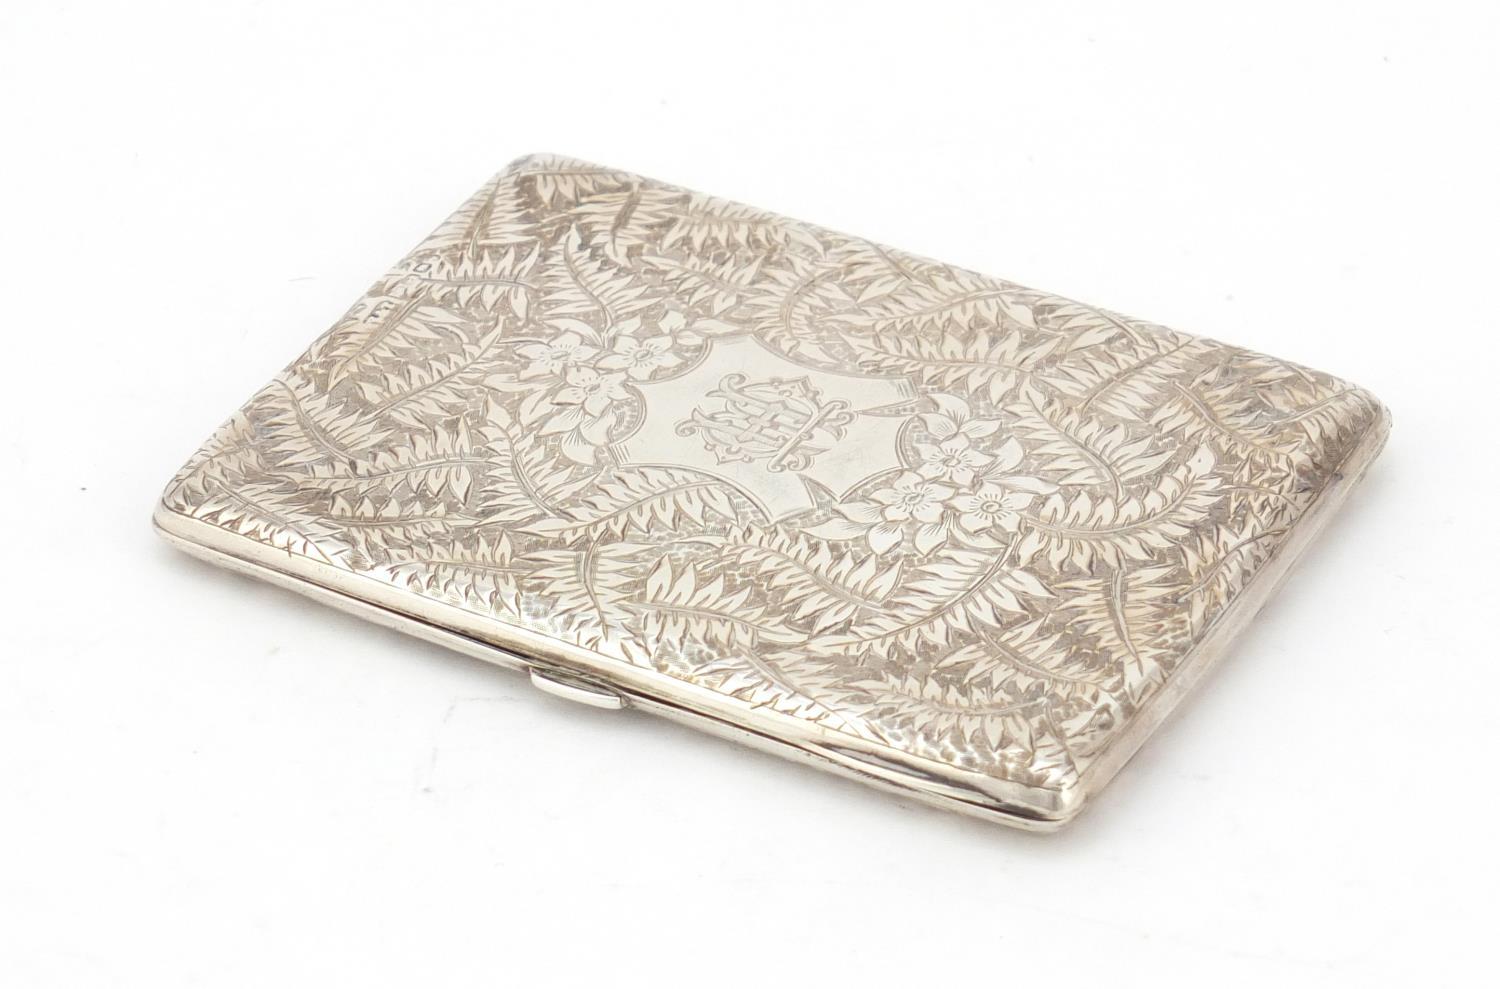 Victorian silver concertina card case, by Hilliard & Thomason, engraved and embossed with ferns,